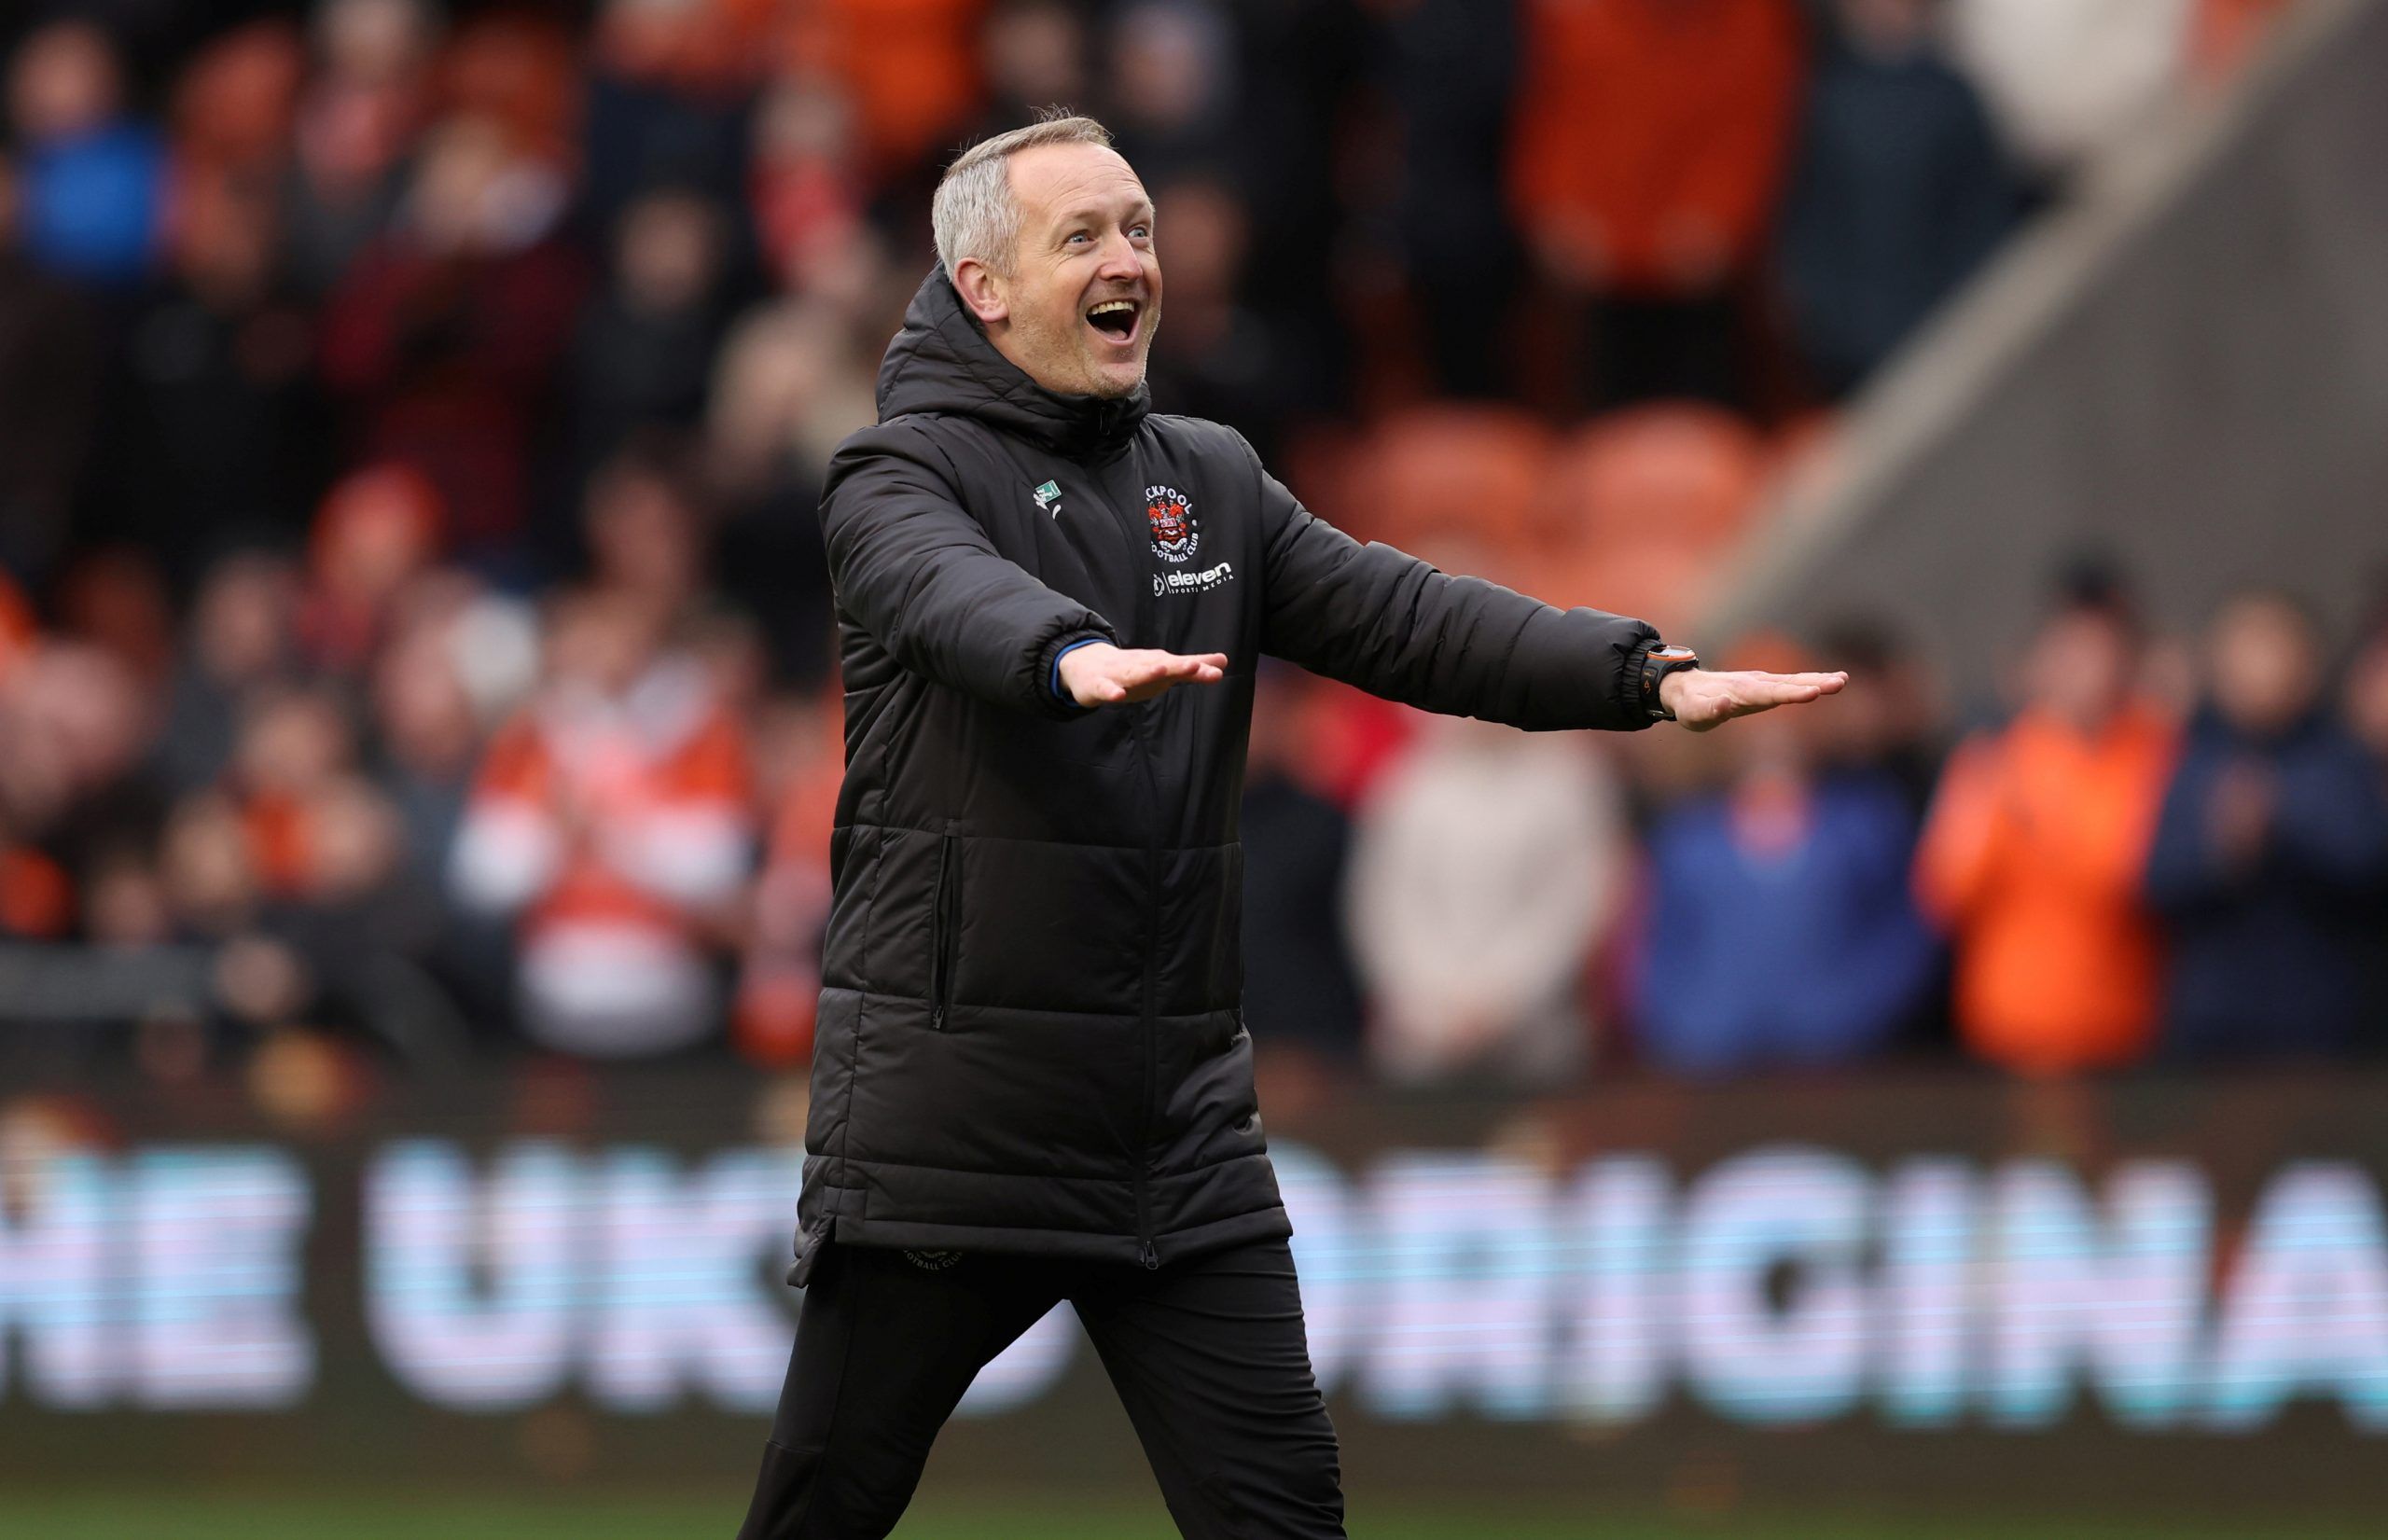  Blackpool manager Neil Critchley celebrates after the match